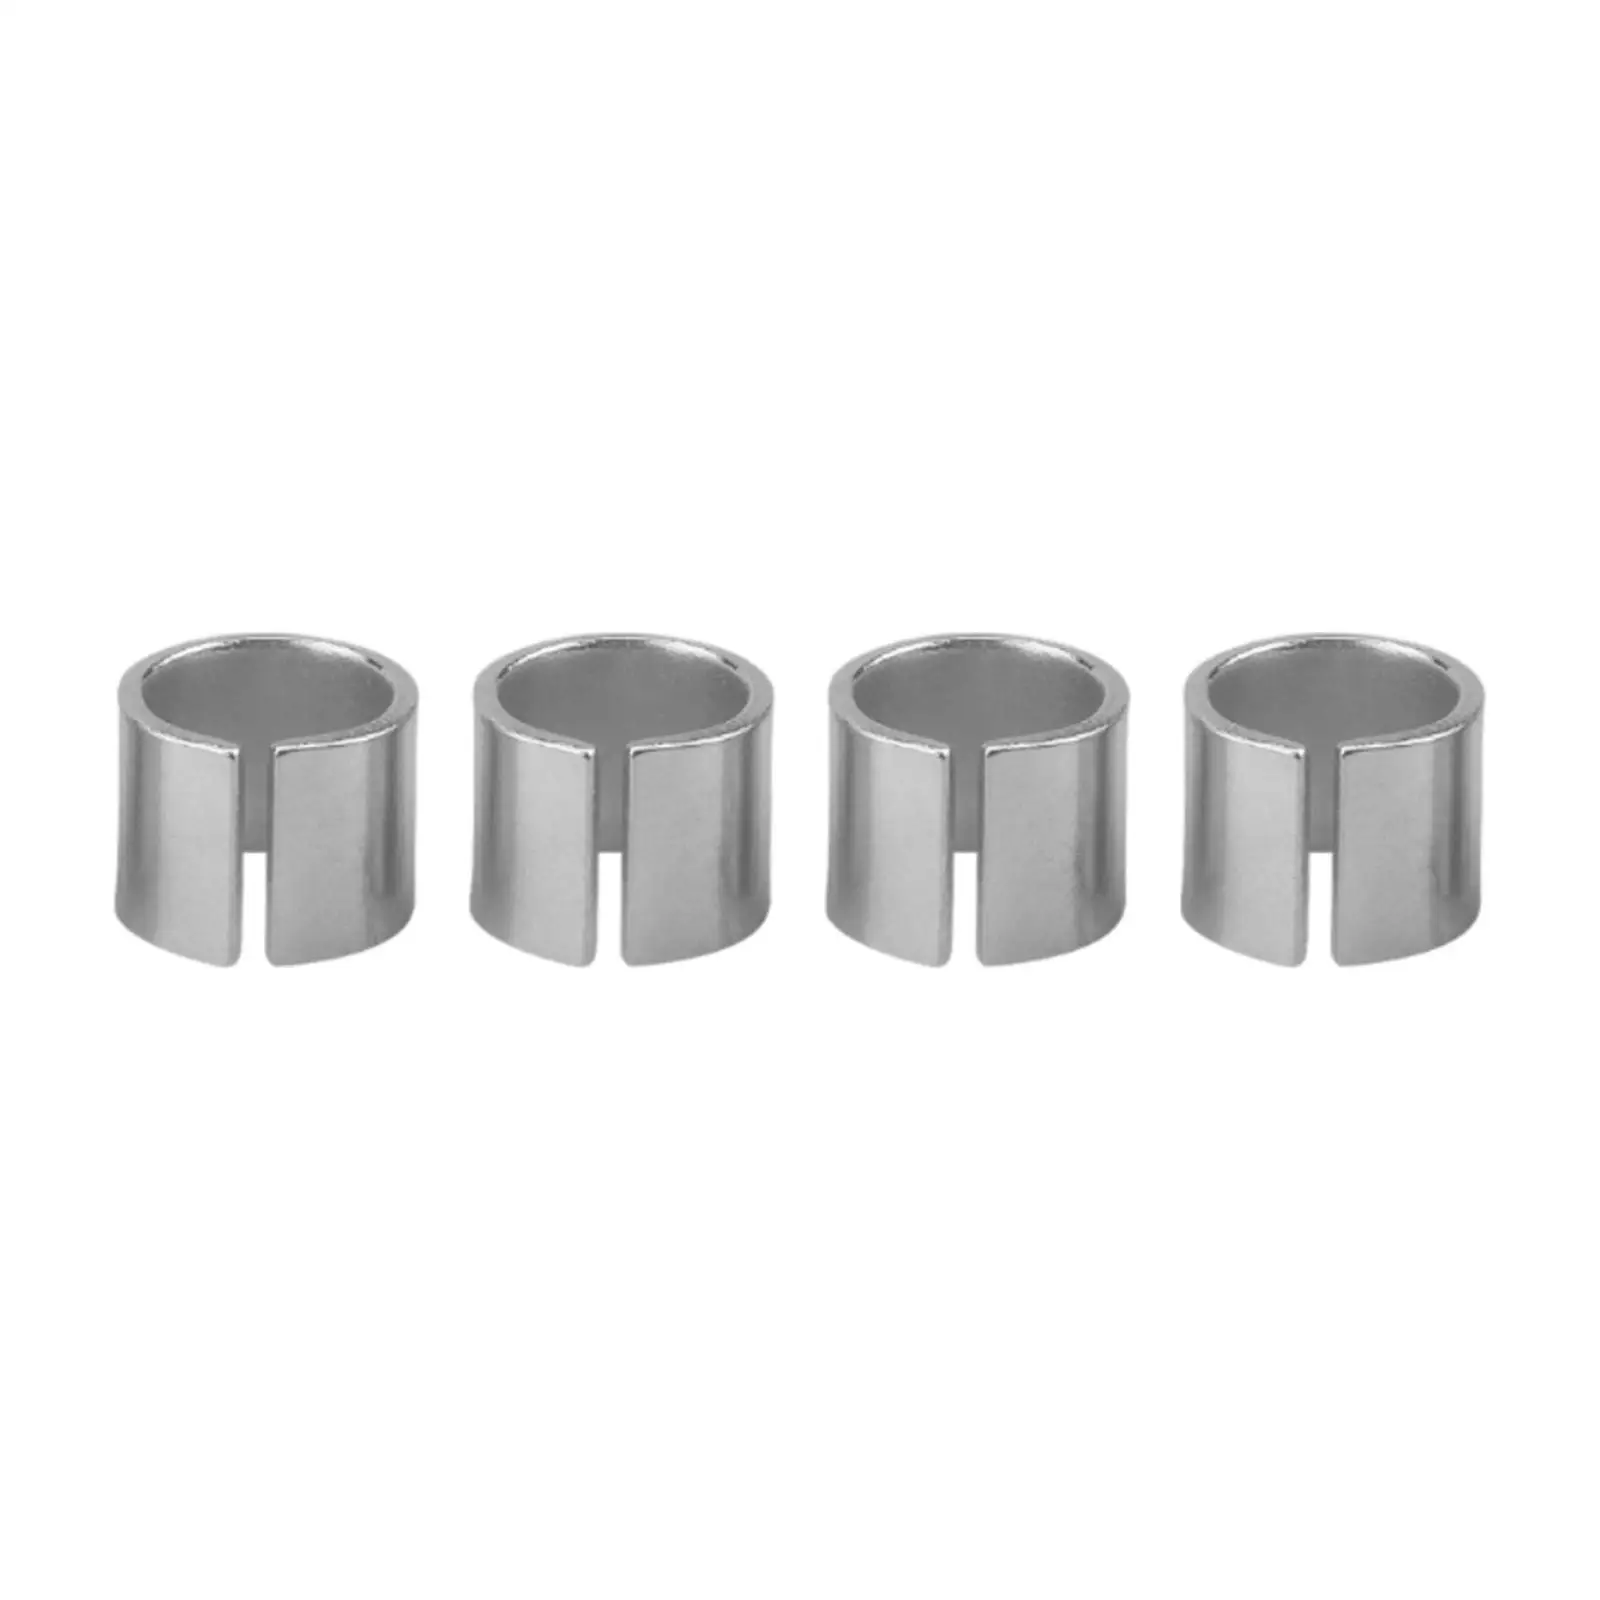 4 Pieces Cylinder Head Dowel Pin Premium replace Chevy ls LT Lq9 LS6 LS1 LS3 LS2 Lq4 L82 L83 L84 L86 L87 lt L8B